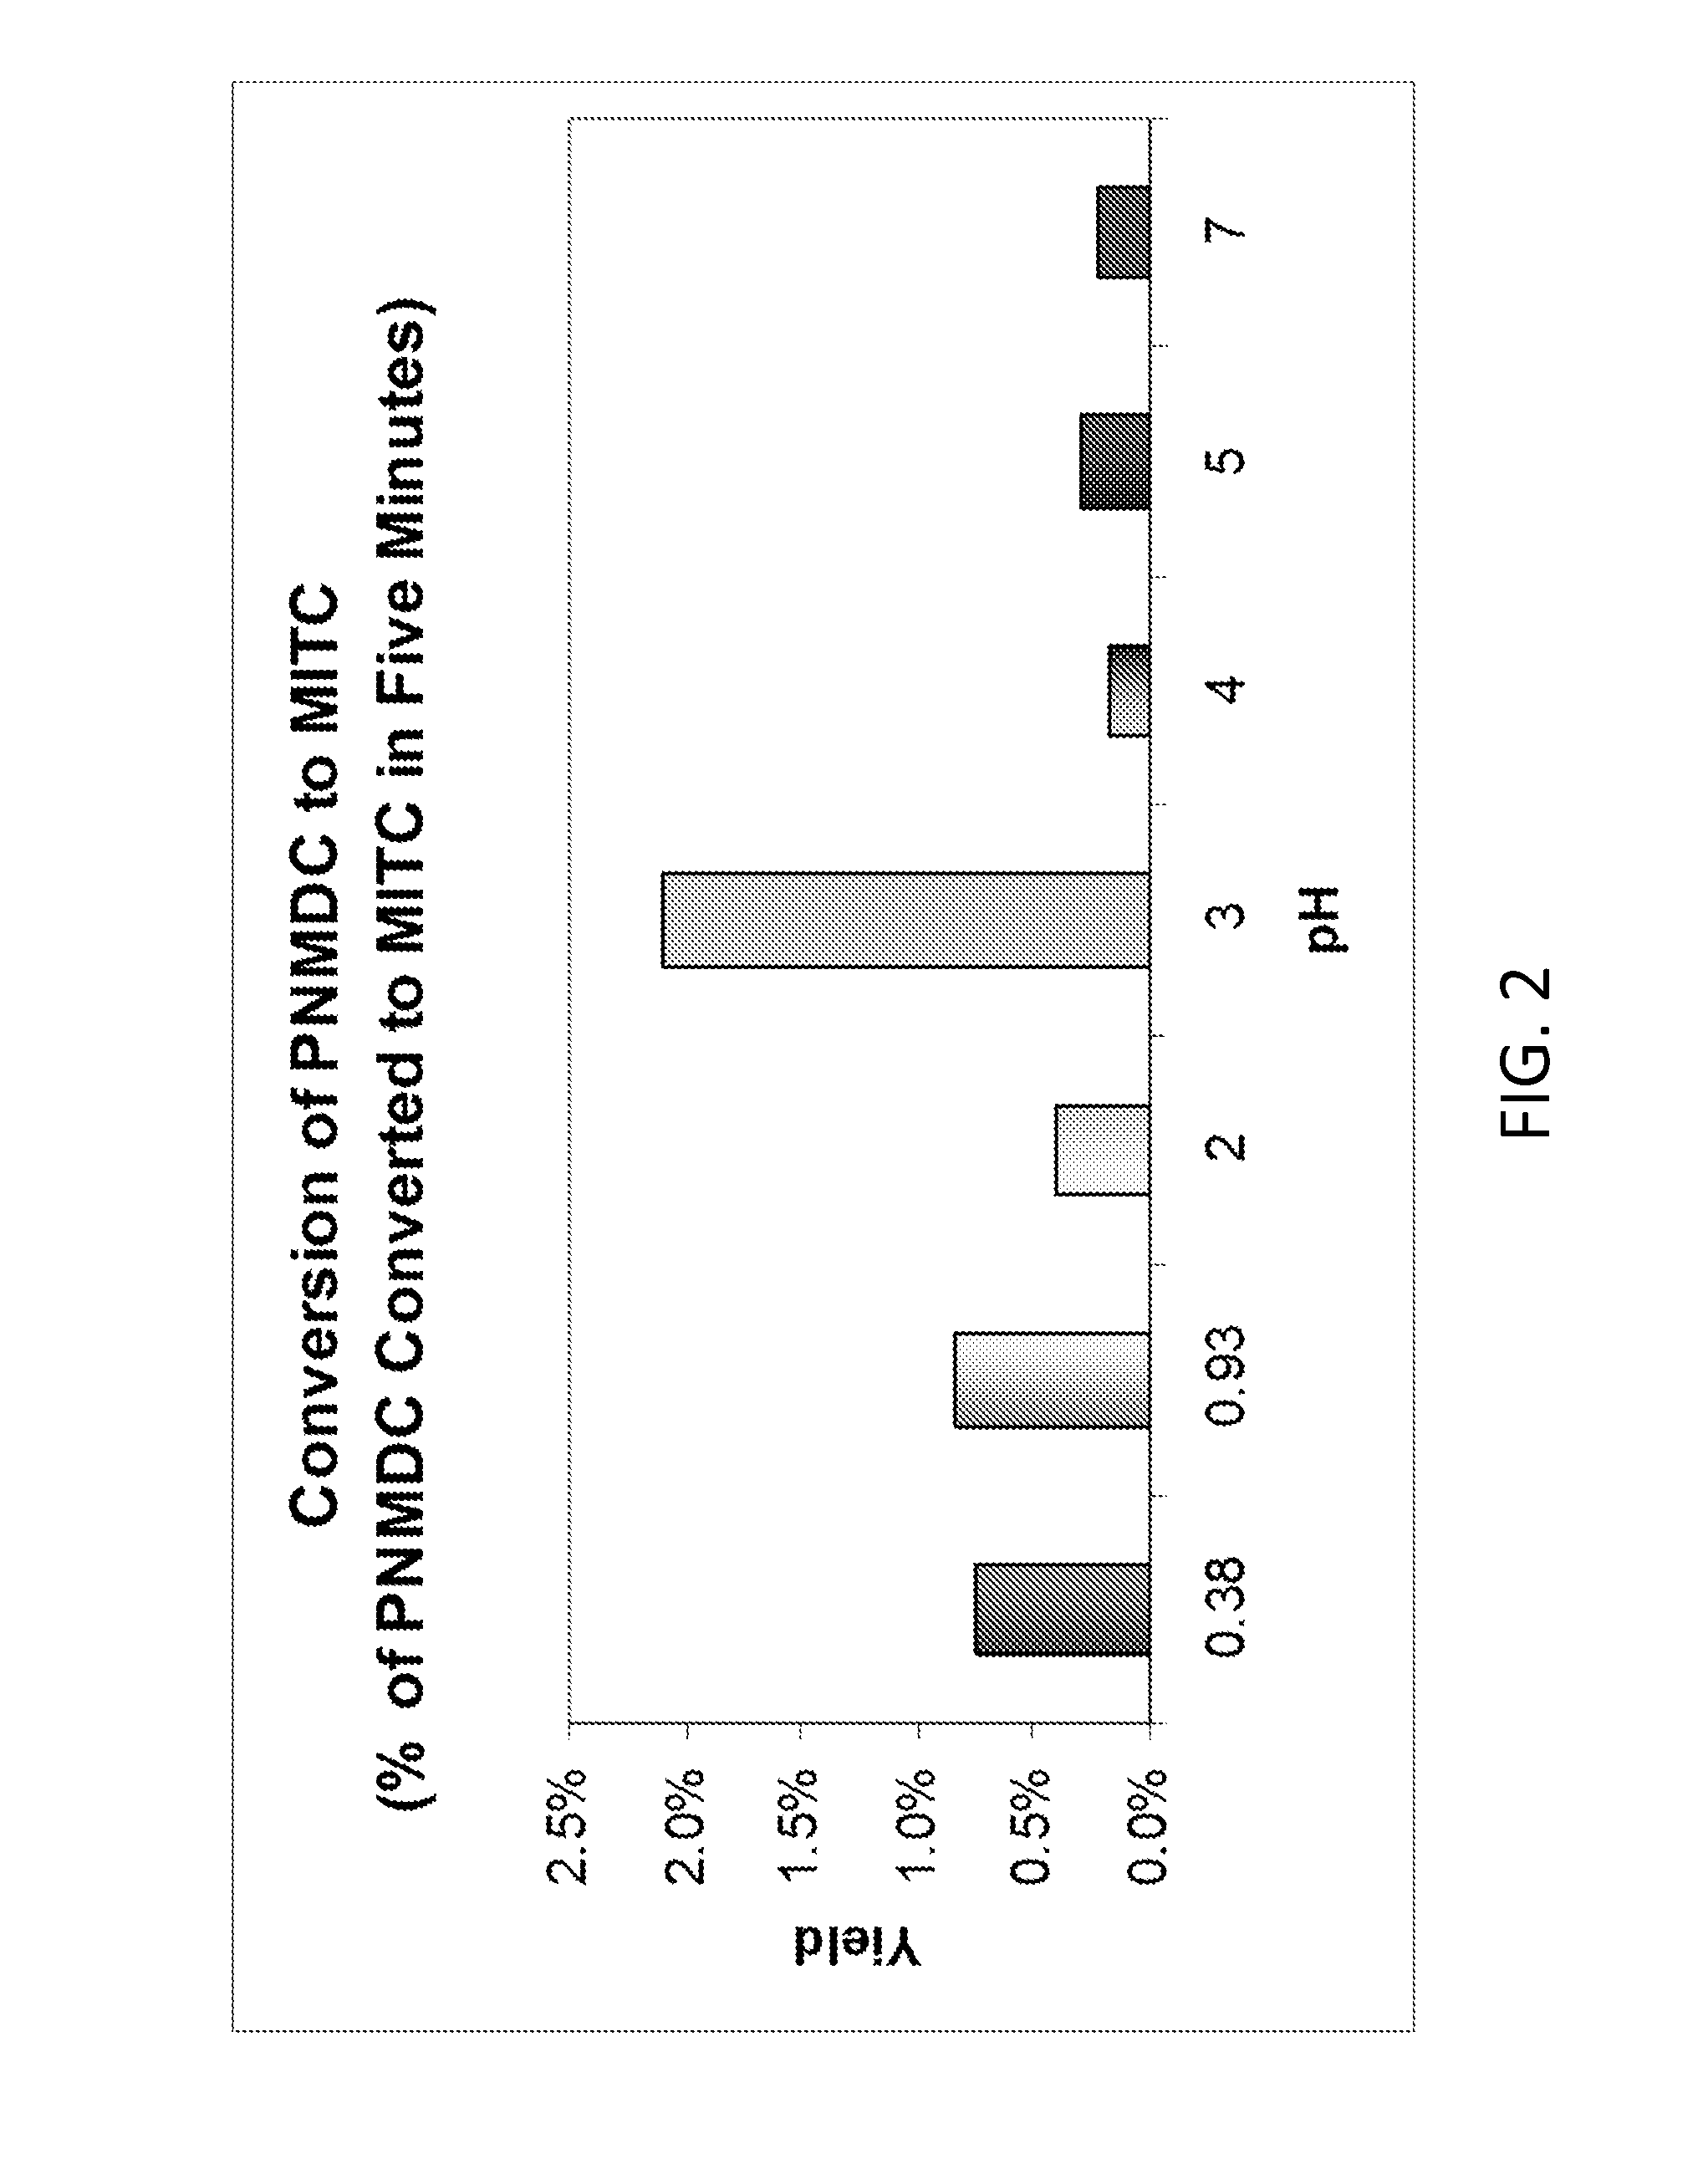 Method And Apparatus For The Enhancement Of The Biocidal Efficacy Of Monoalkyldithiocarbamate Salts